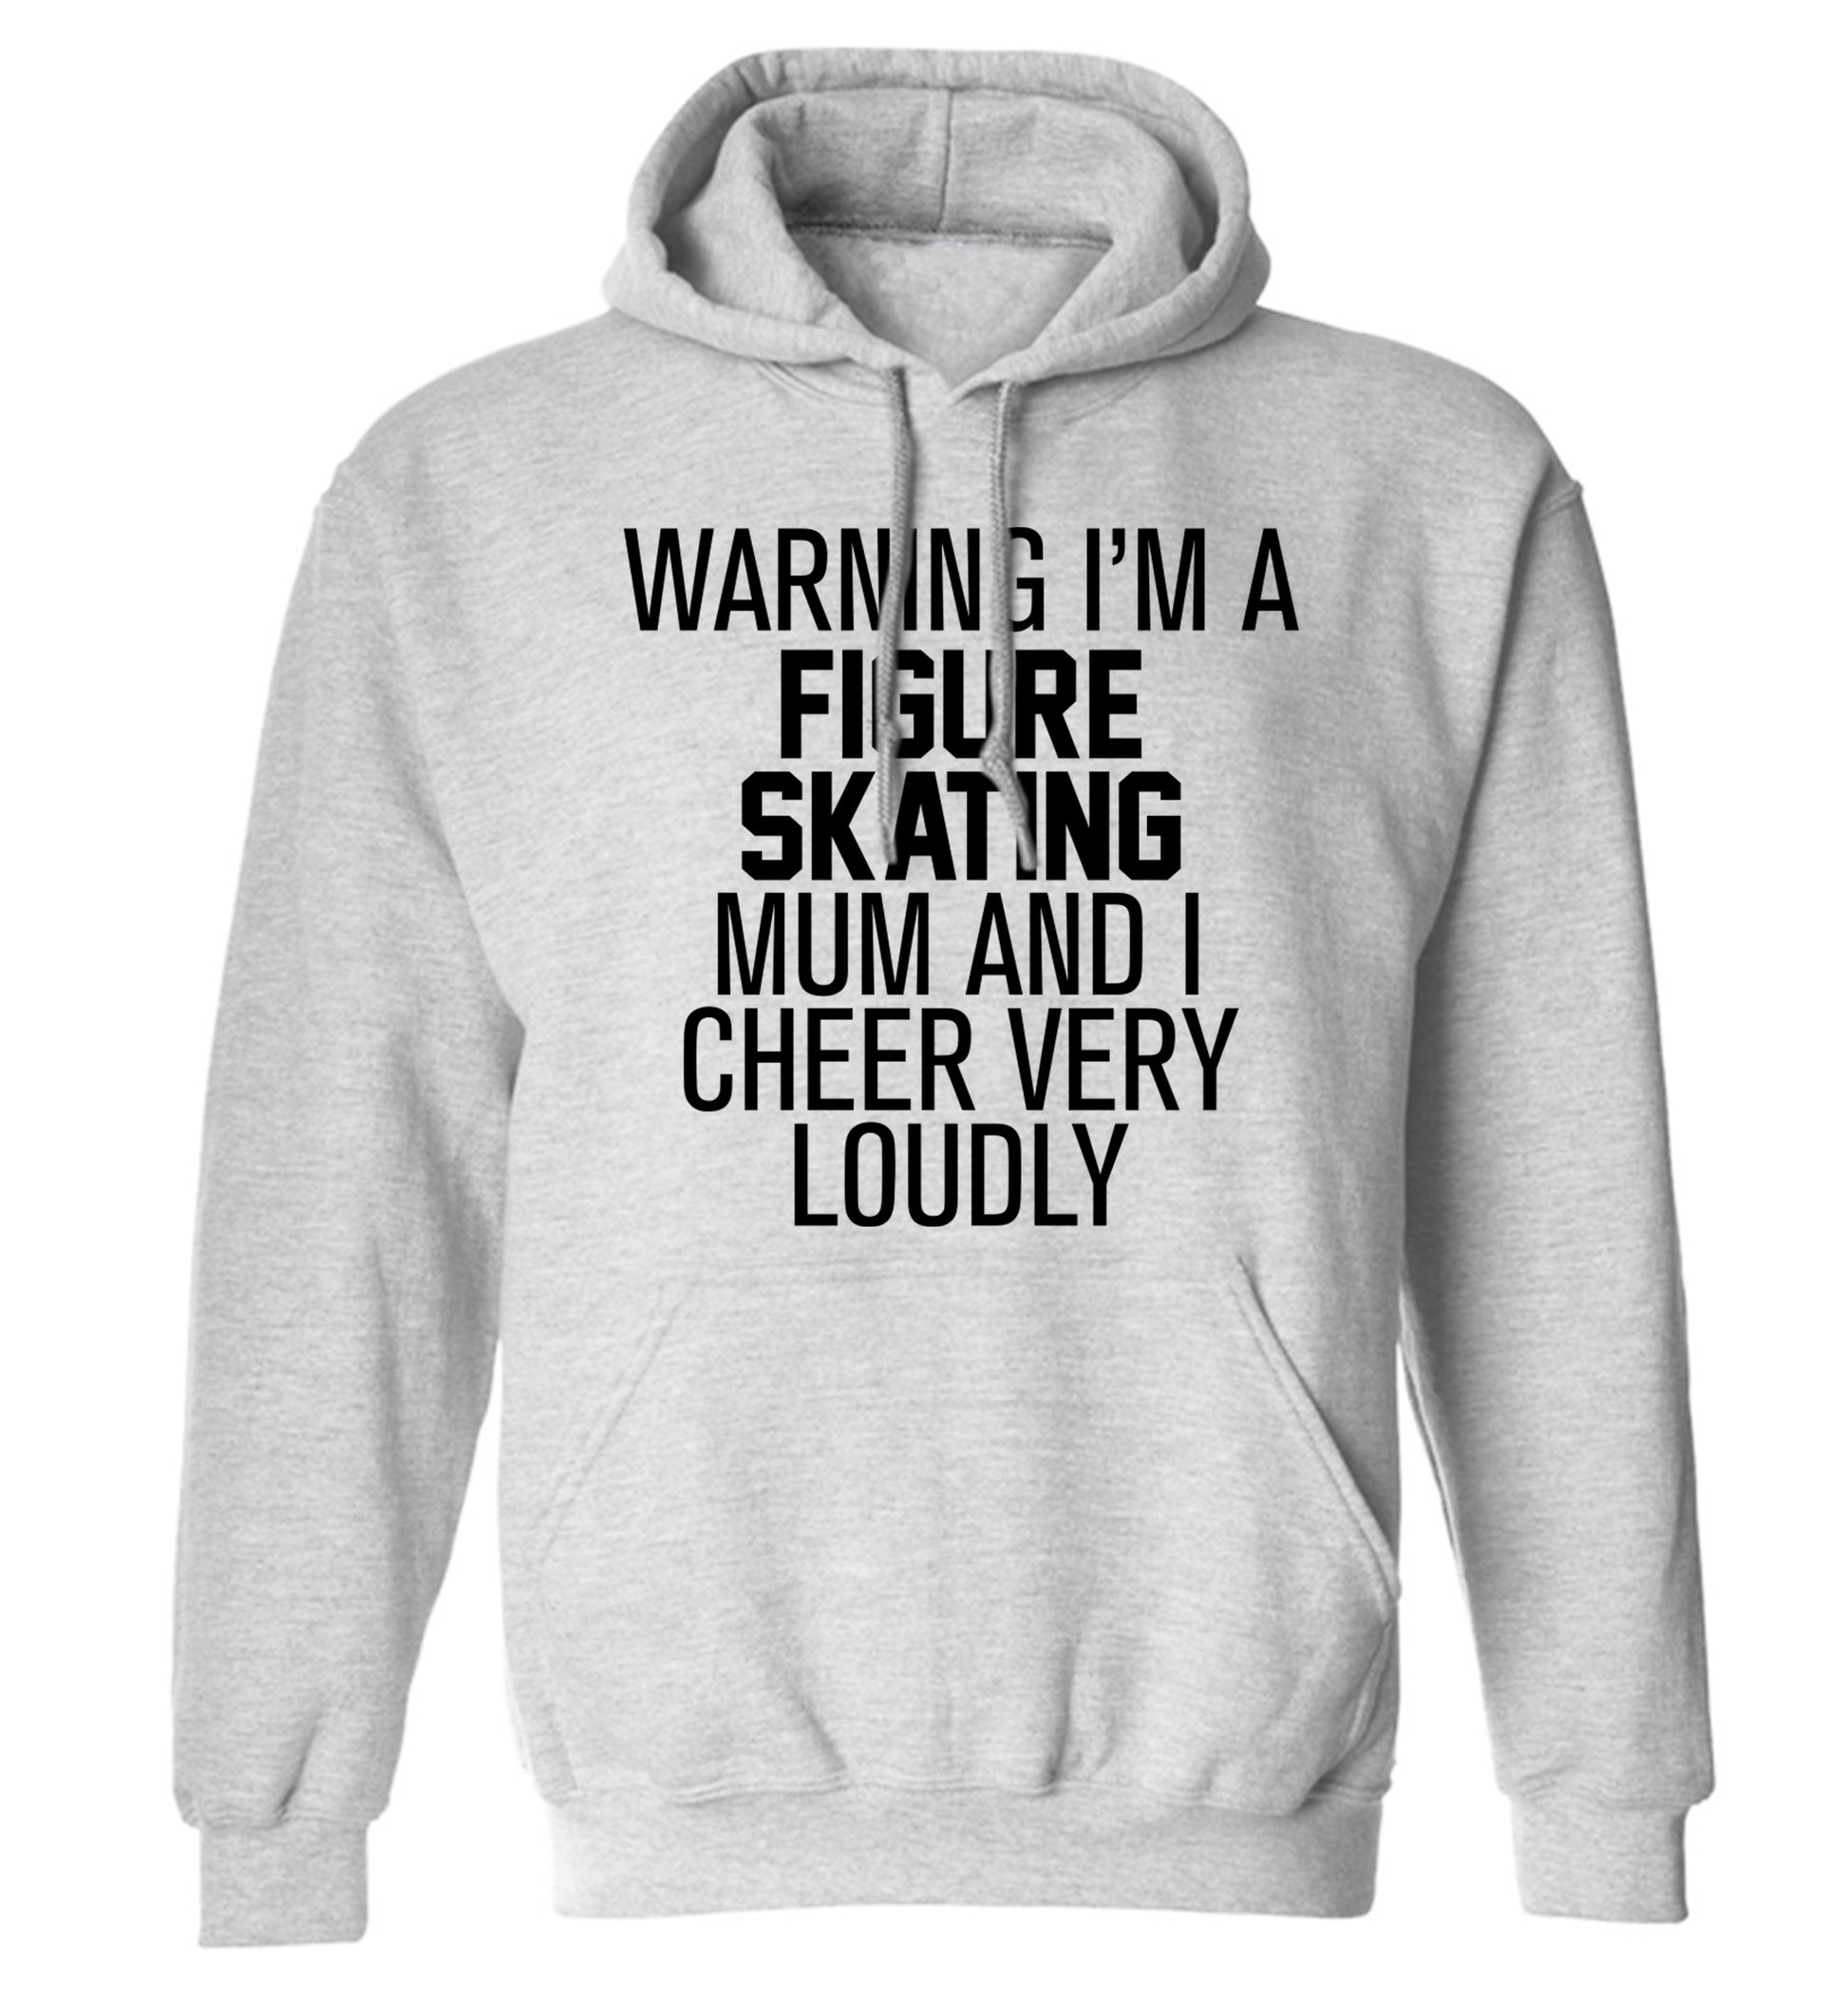 Warning I'm a figure skating mum and I cheer very loudly adults unisexgrey hoodie 2XL